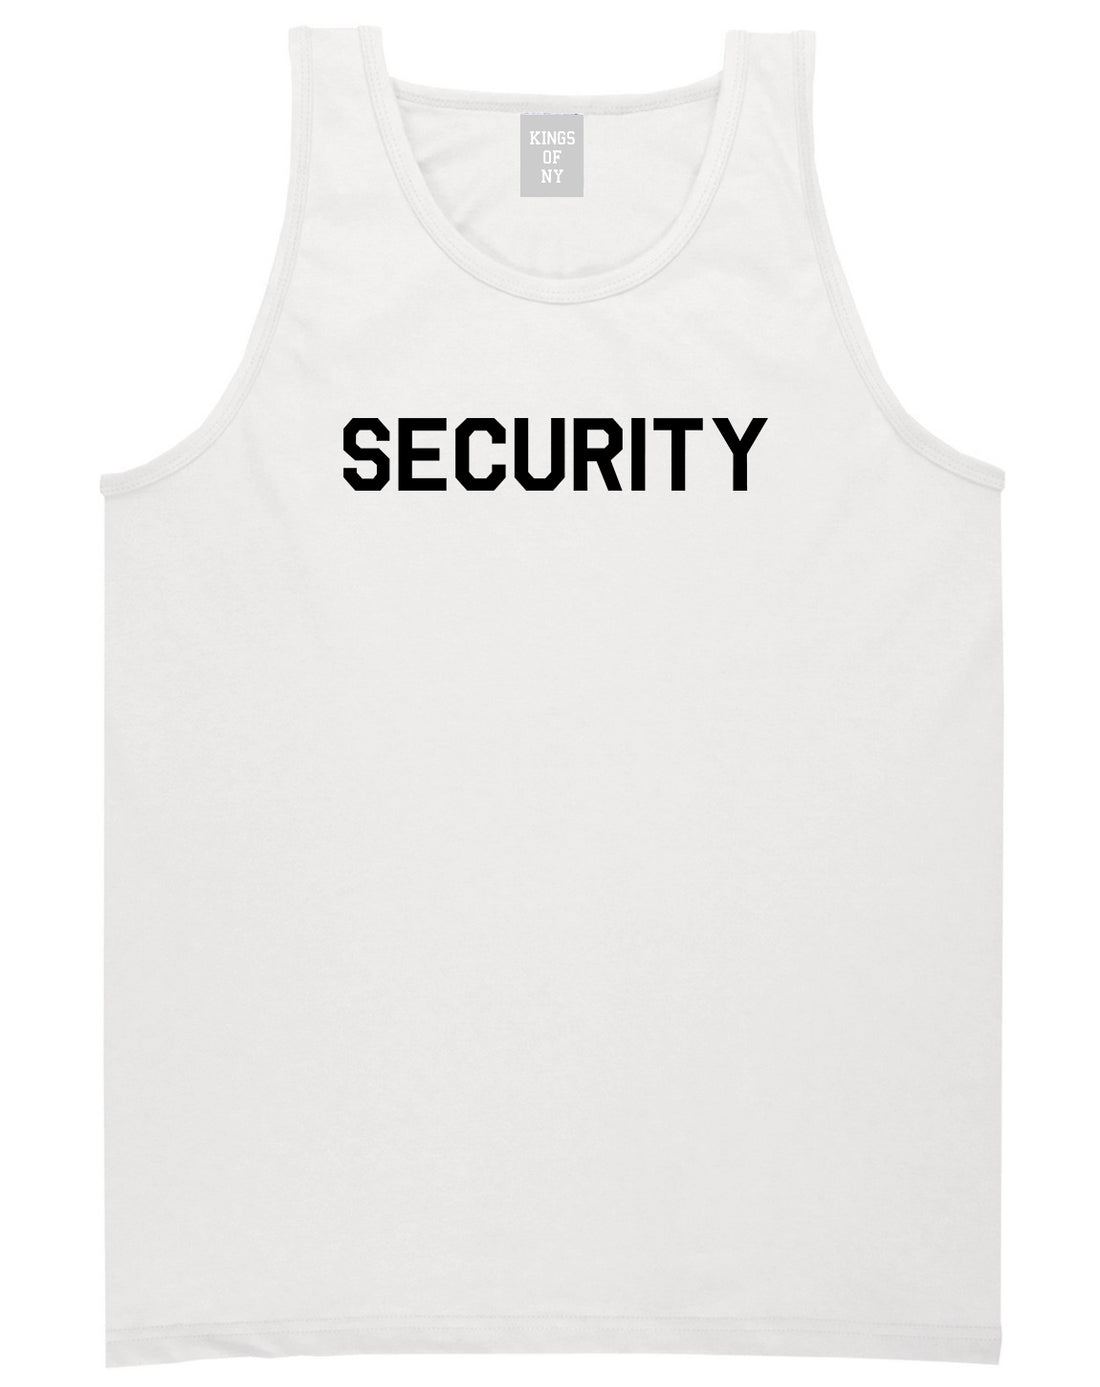 Event Security Uniform Mens White Tank Top Shirt by KINGS OF NY